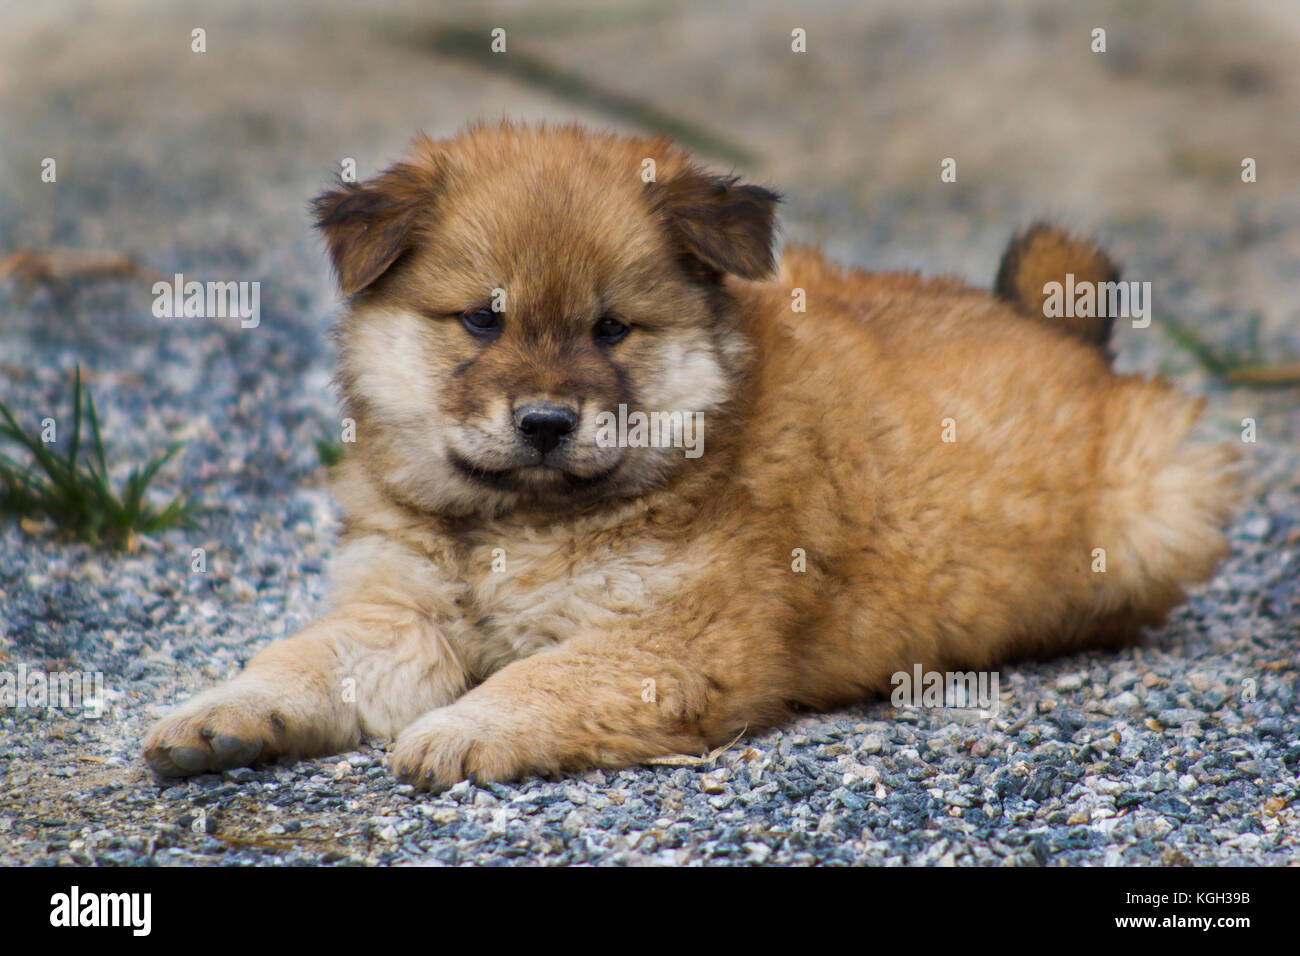 A playful mongrel puppy reclines on a gravel road in China Stock Photo